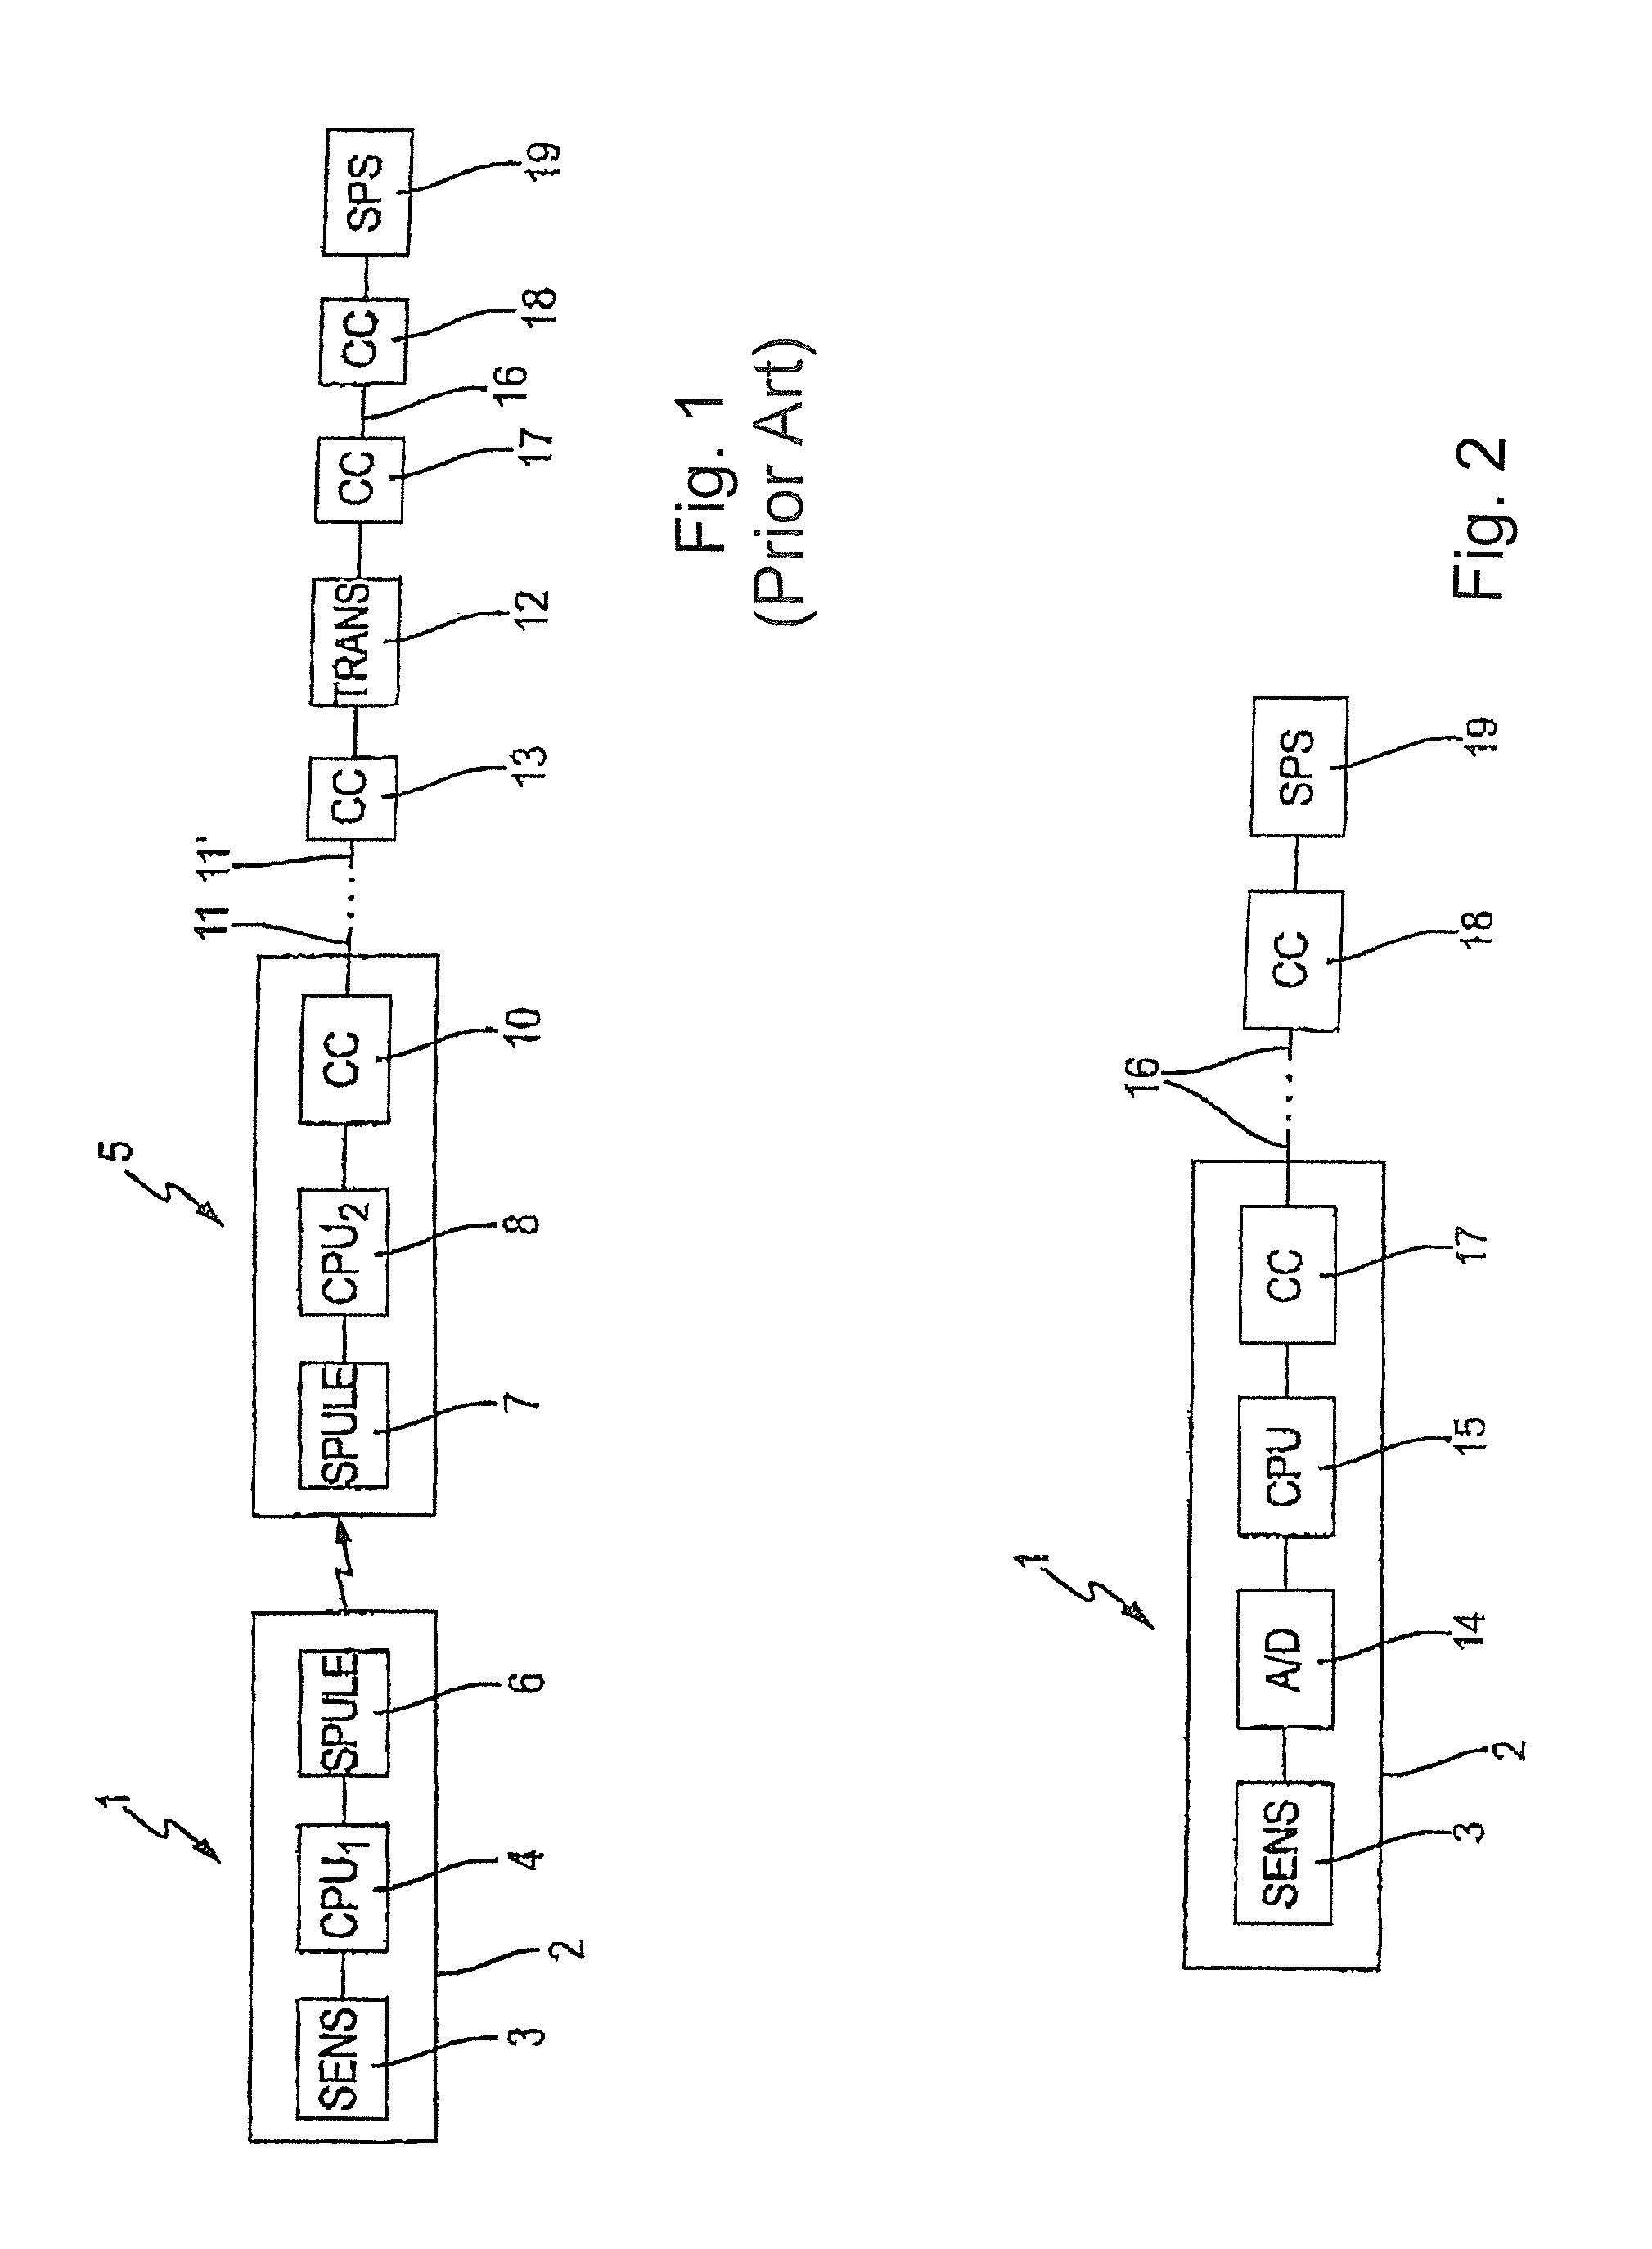 Sensor for liquid and/or gas analysis directly connectable to a higher-ranking control system